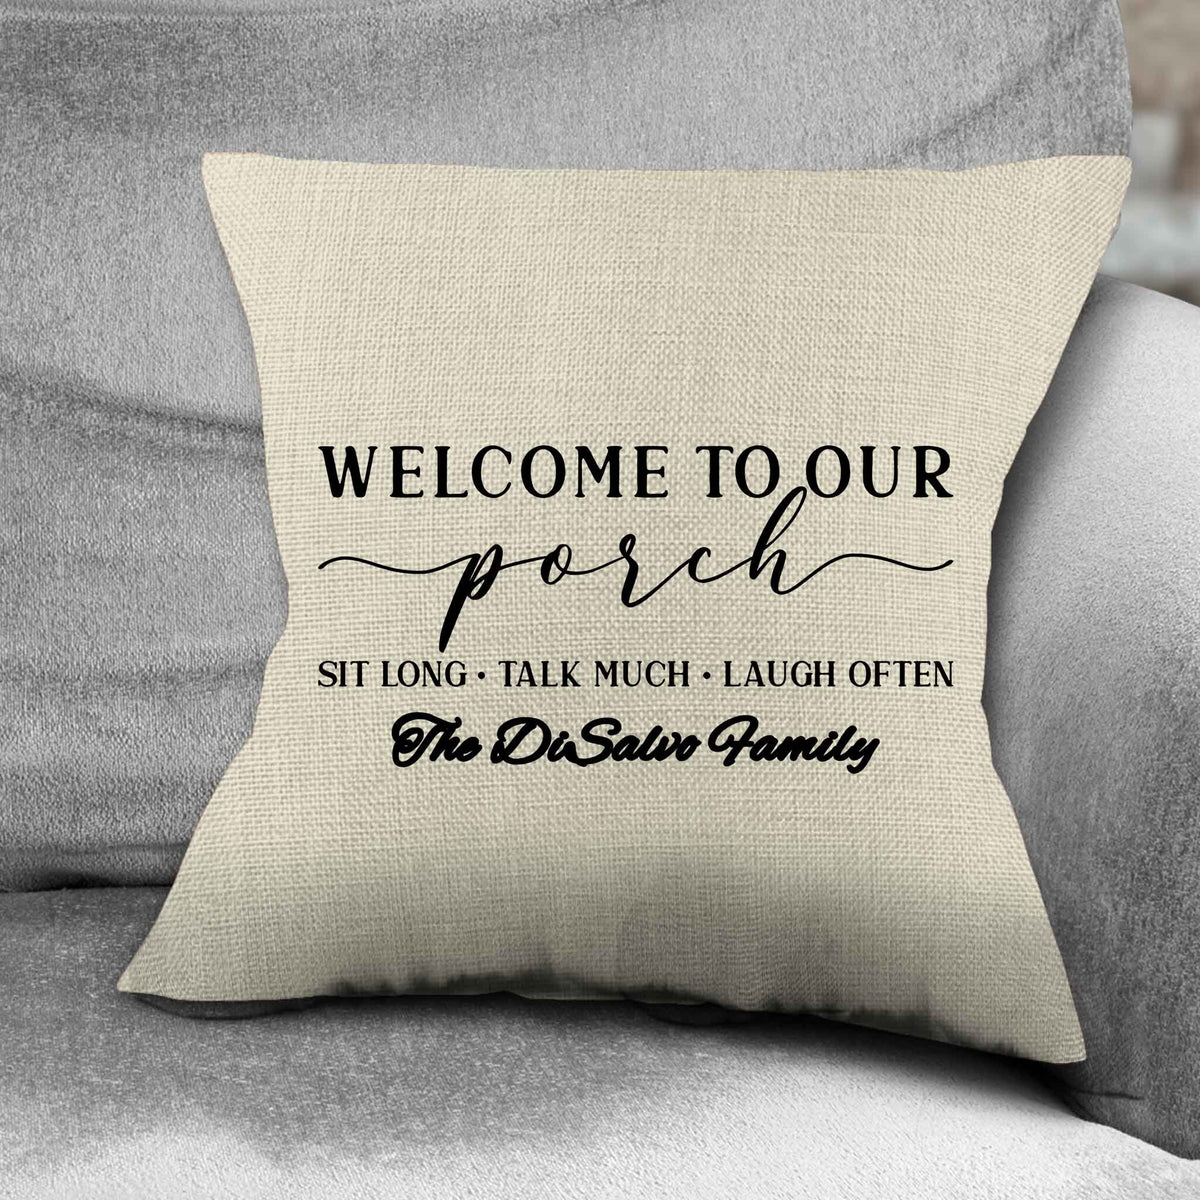 Personalized Throw Pillow | Custom Decorative Pillow | Welcome to our Porch